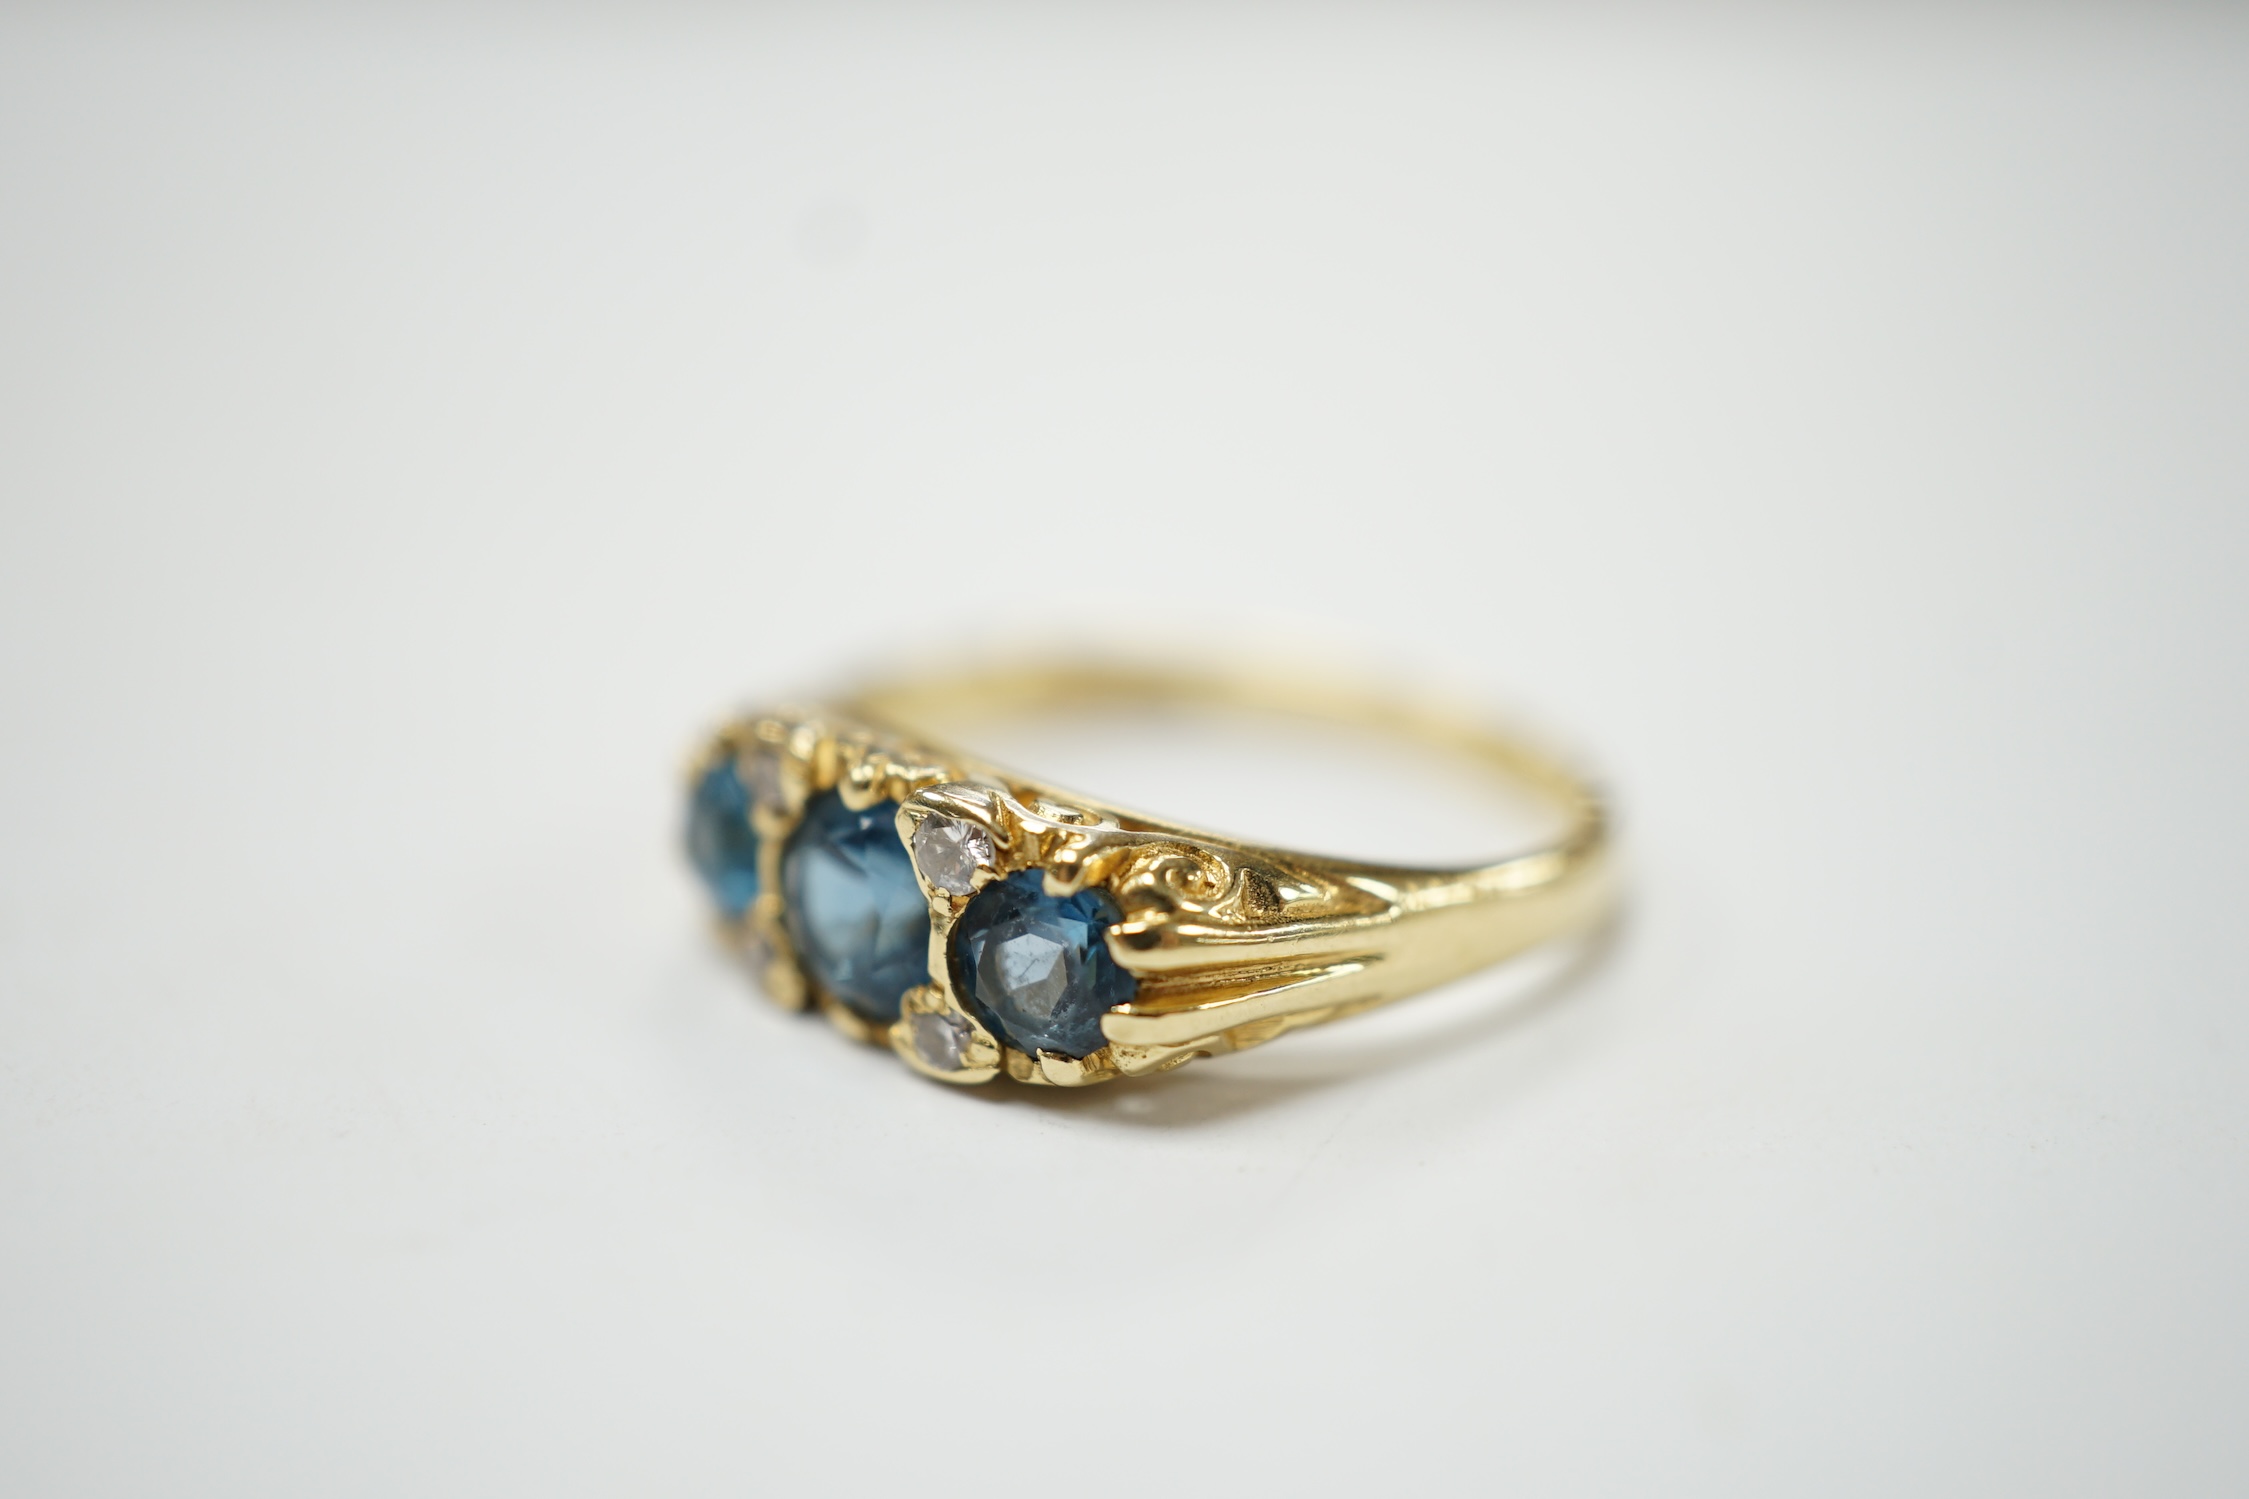 A modern Edwardian style 18ct gold and three stone blue topaz set ring, with diamond chip spacers, size M, gross weight 4.1 grams. Fair condition.